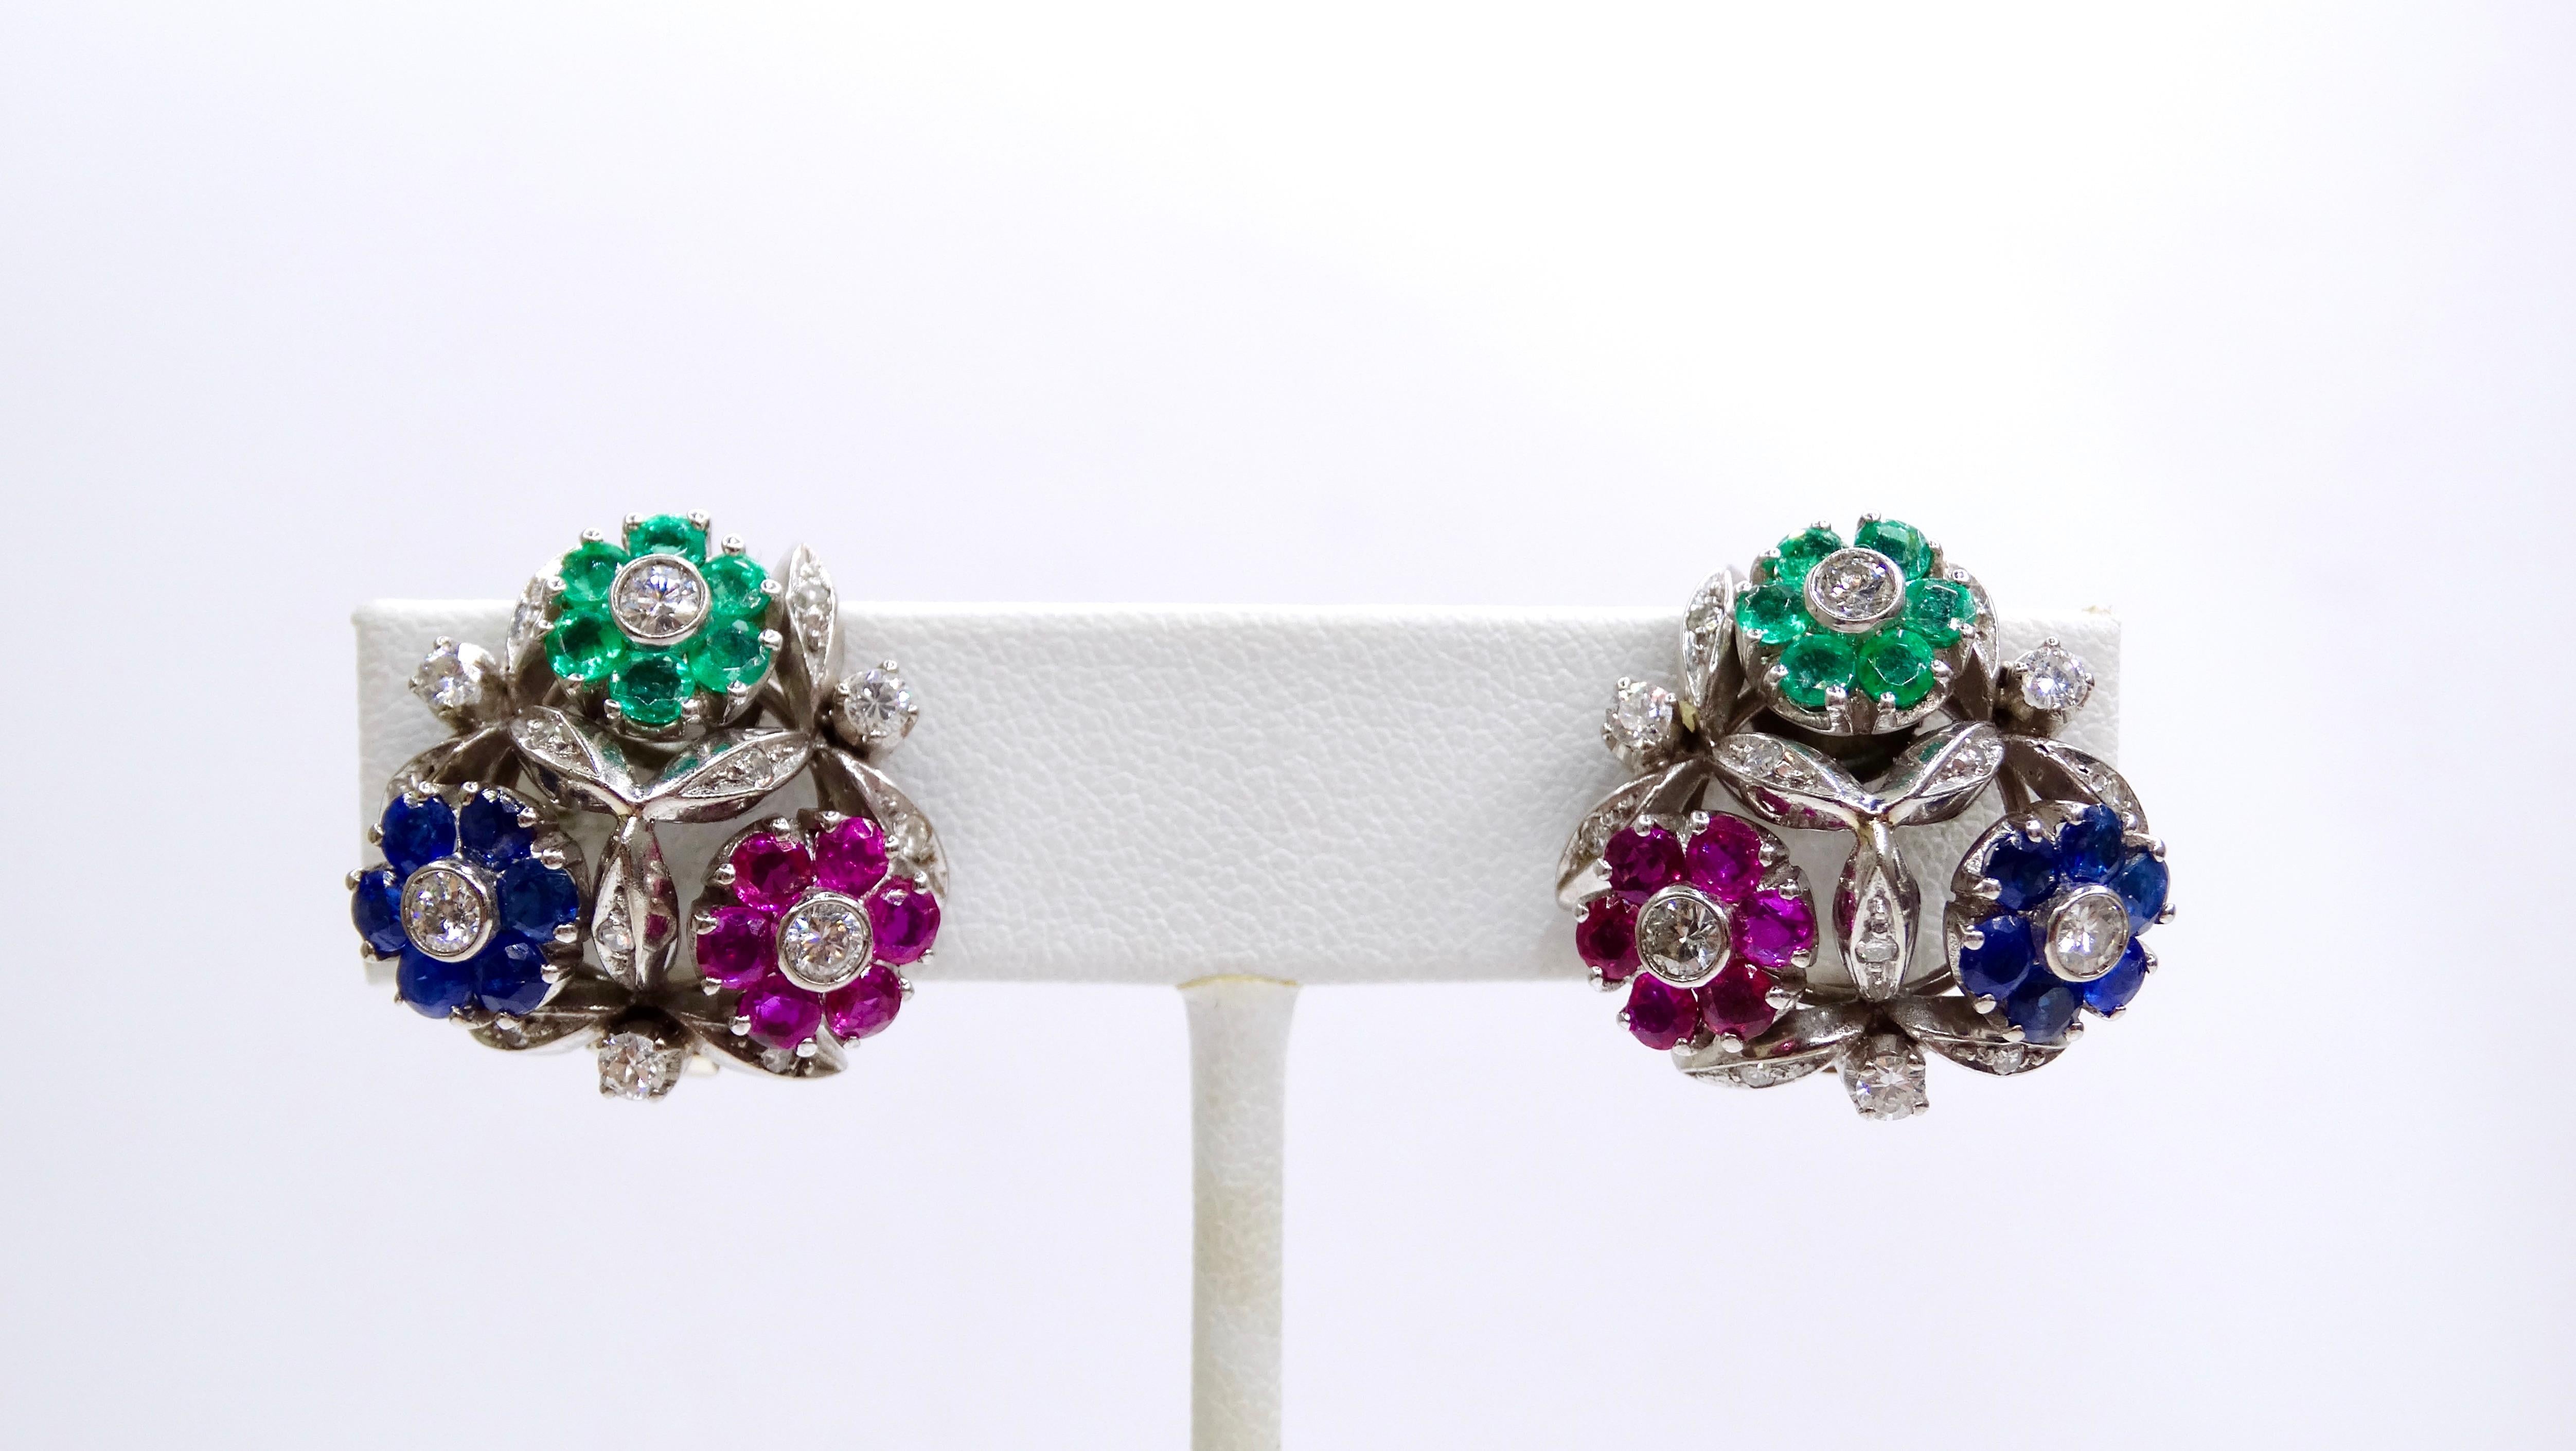 Bring a feminine flair to your ensemble with these flirty VCA earrings. Circa 1950's, these ultra-rare earrings are made from platinum and weigh 16.58 total grams. Include 12Colombian Emeralds (0.84ctw), 12 Rubies (1.44ctw), 12 Sapphires (1.44ctw),